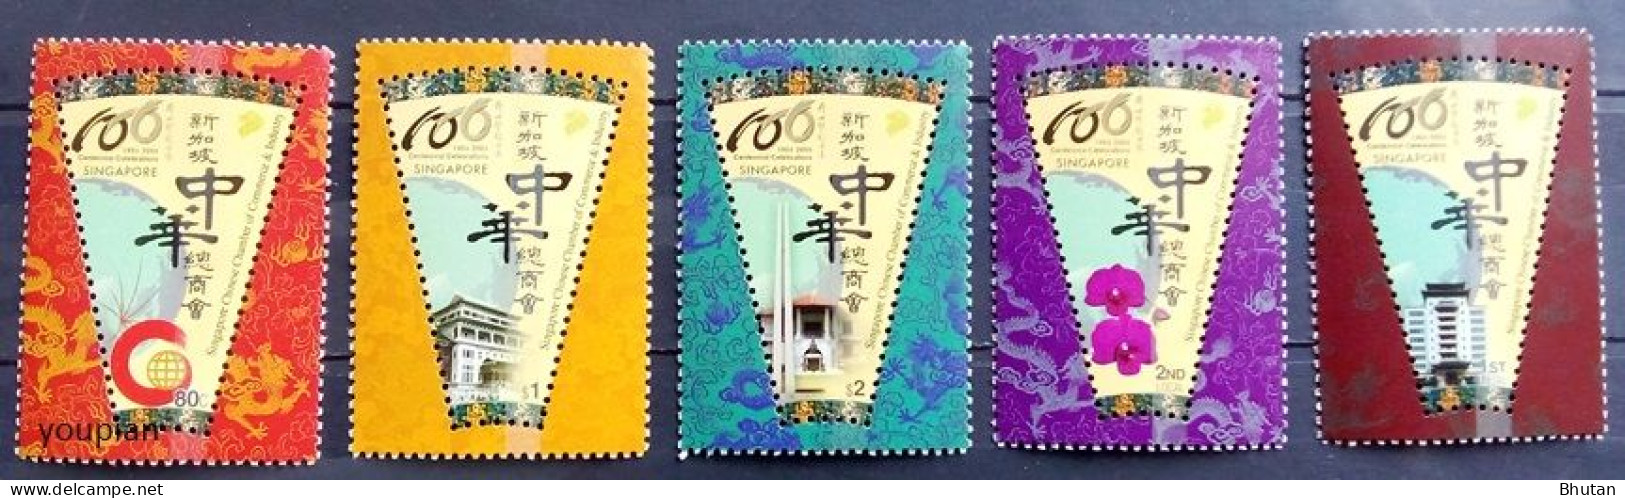 Singapore 2006, Chinese Chamber Of Commerce - Fans, MNH Unusual Stamps Set - Singapur (1959-...)